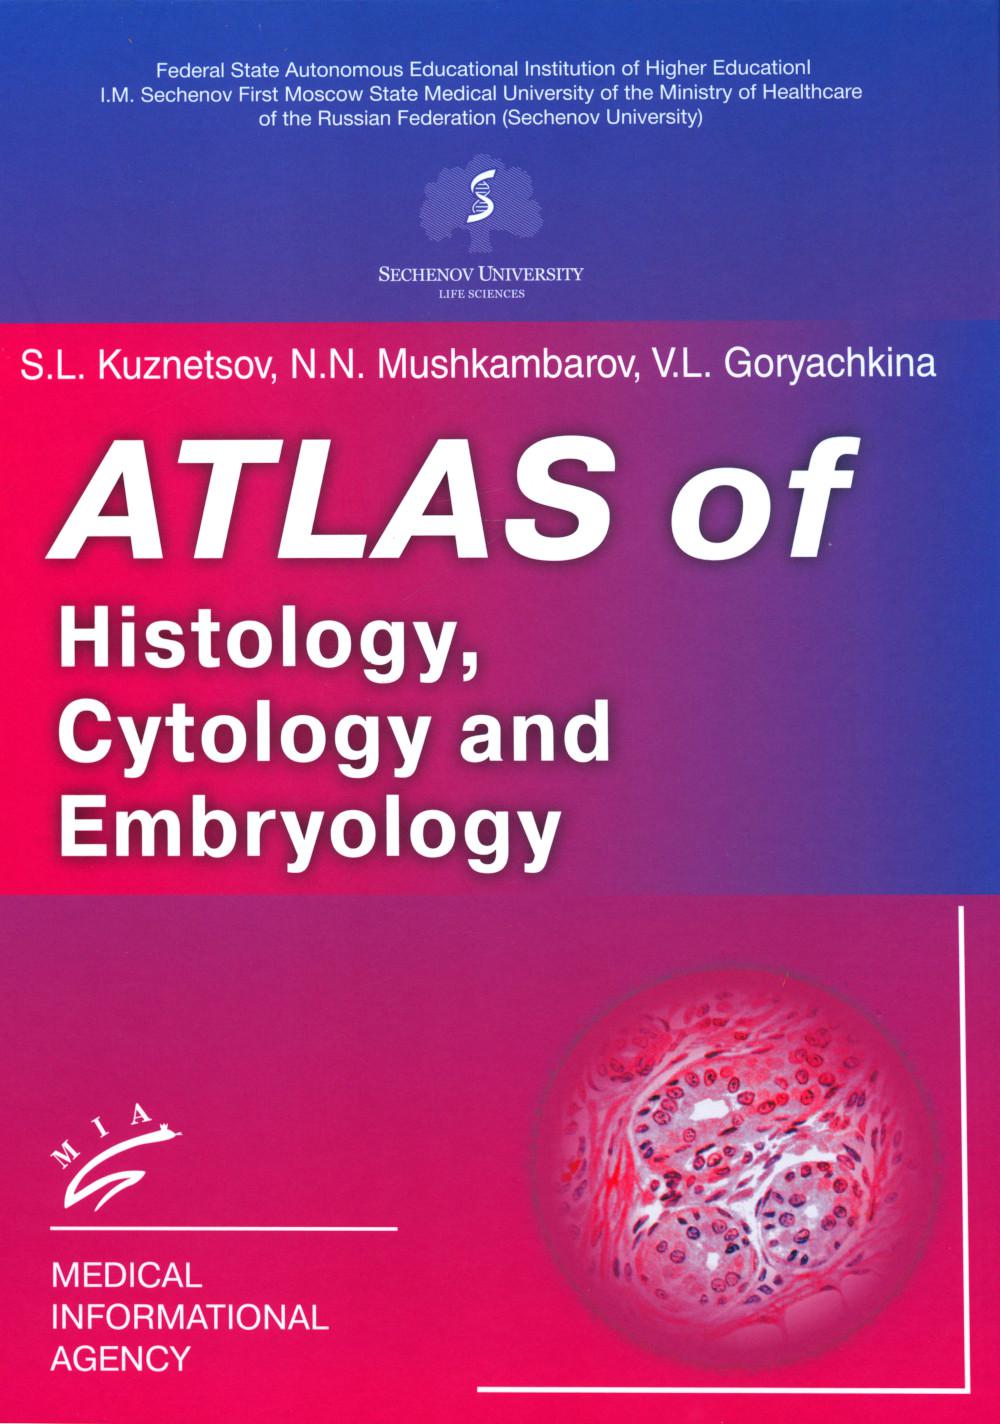  ..,  ..,  .. Atlas of Histology, Cytology and Embryology 